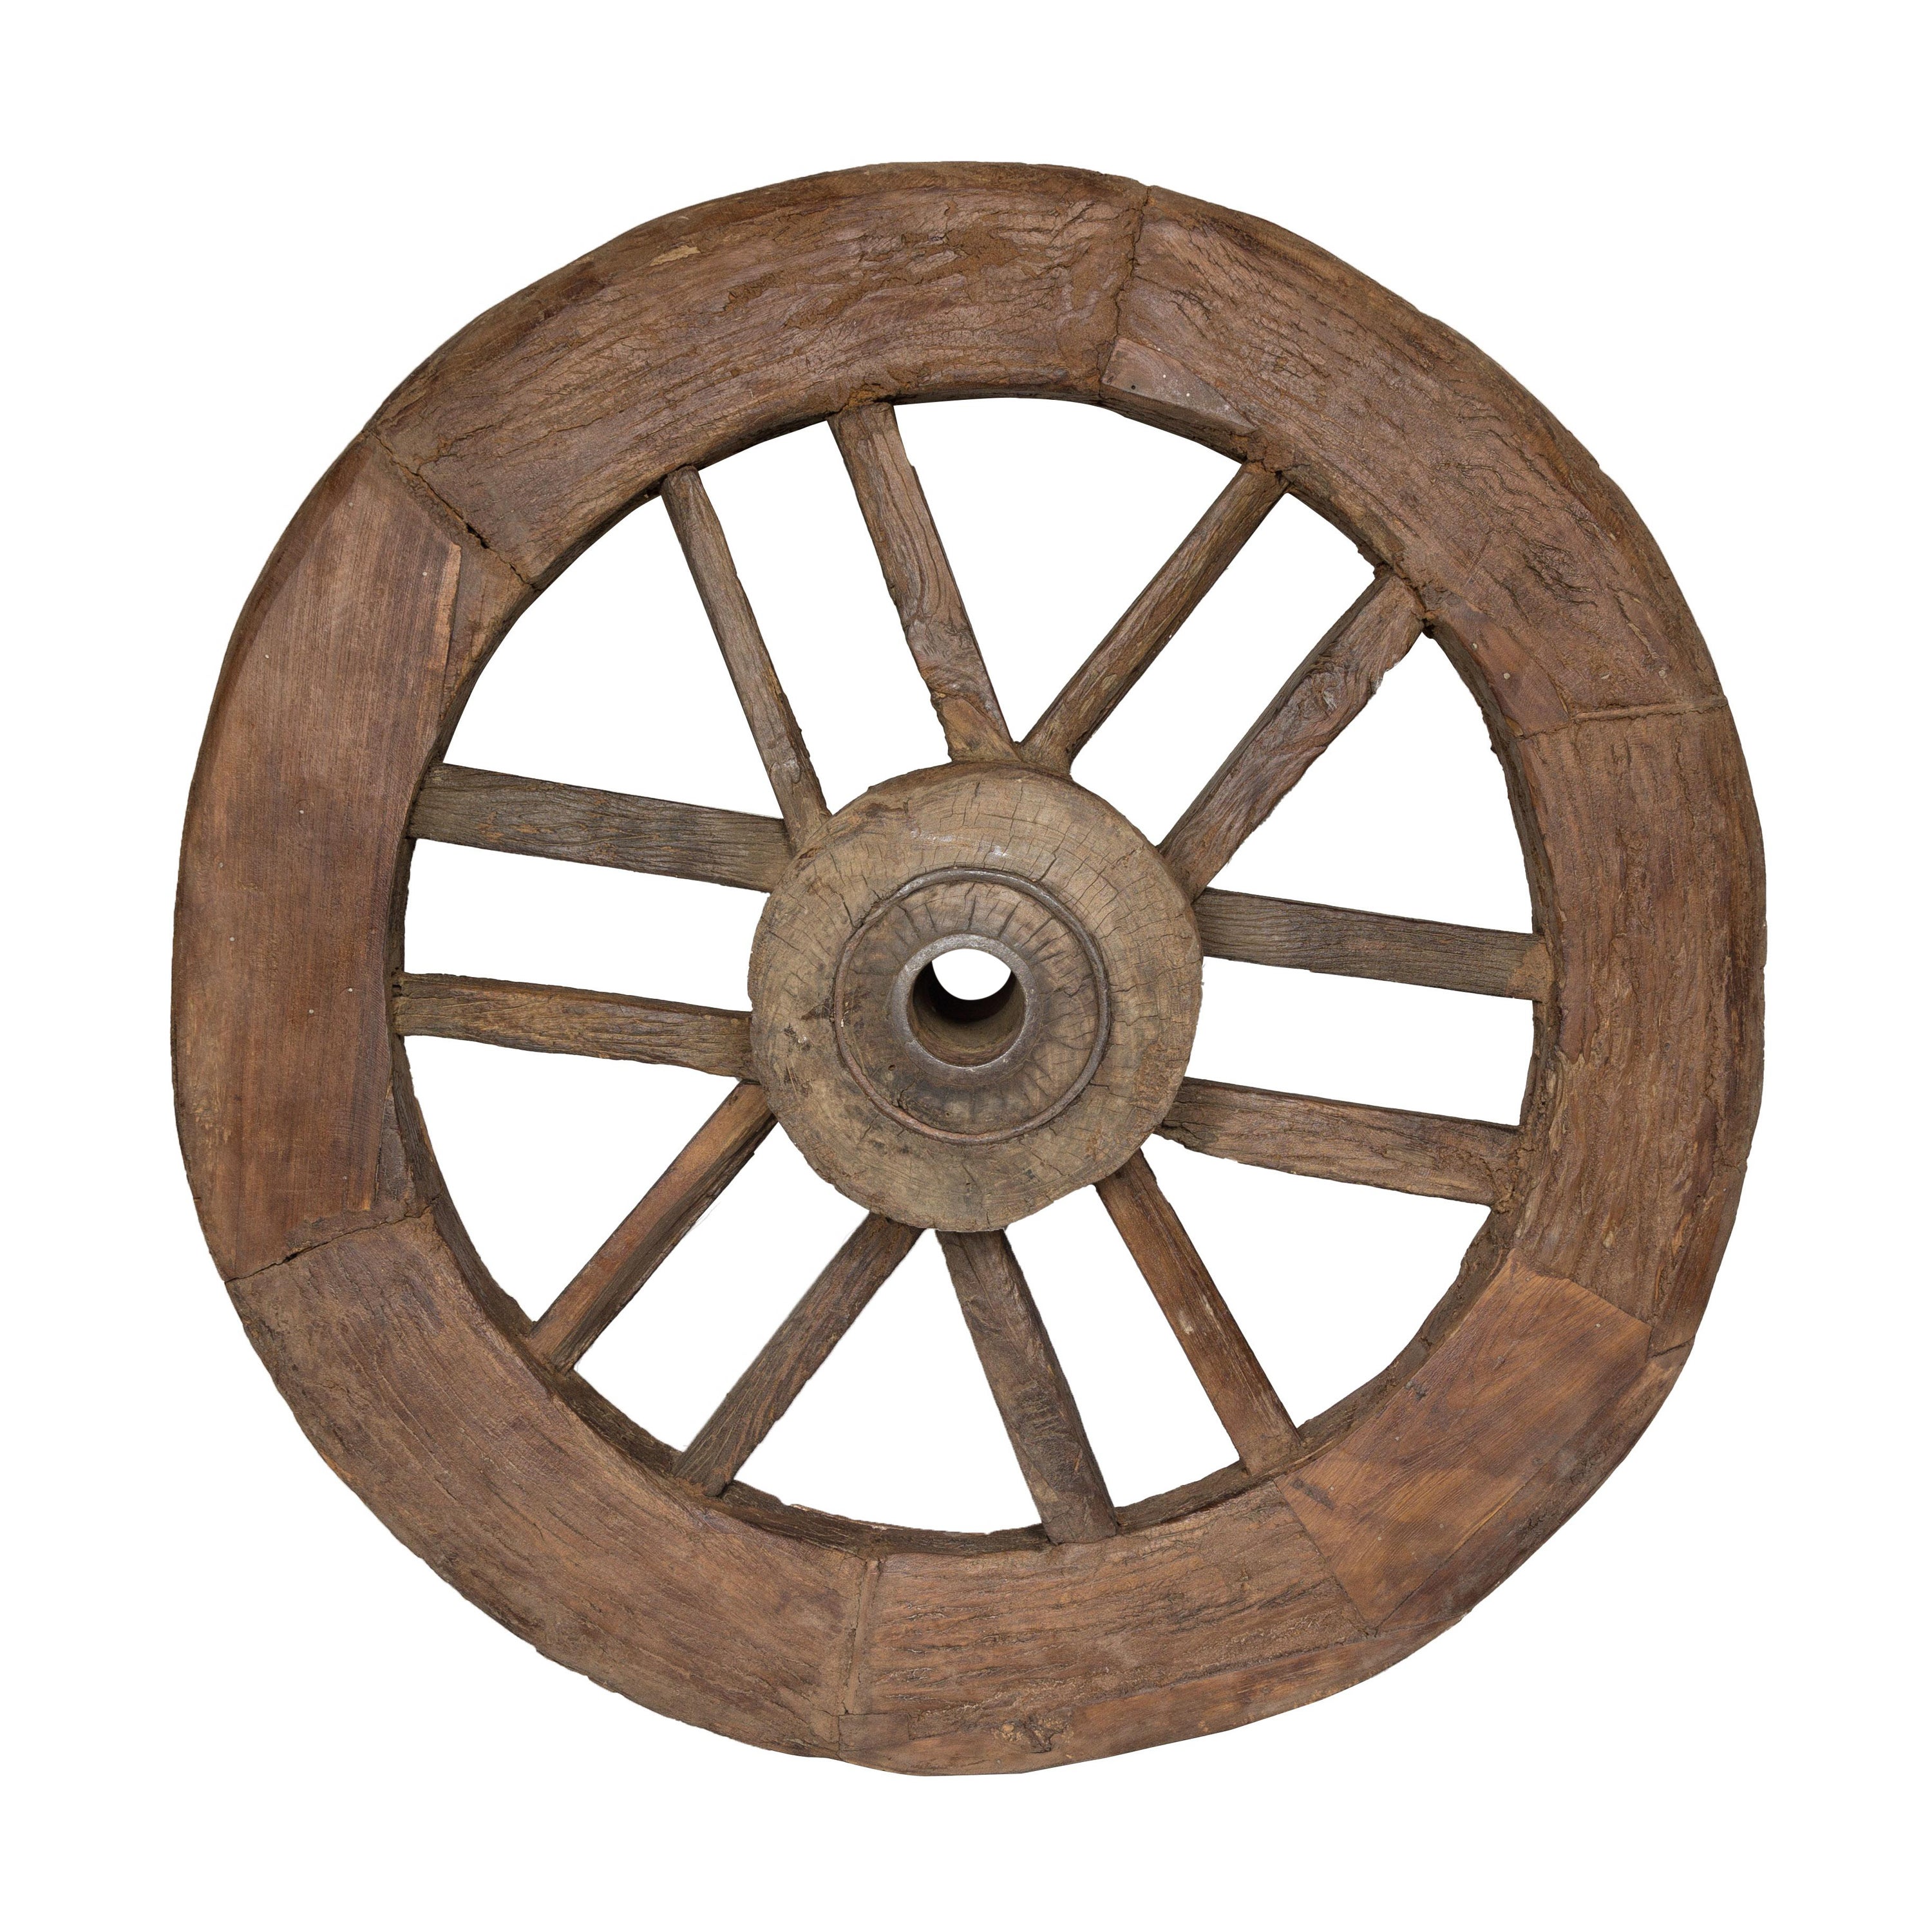 Indian 19th Century Wood and Metal Cart Wheel with Rustic Character